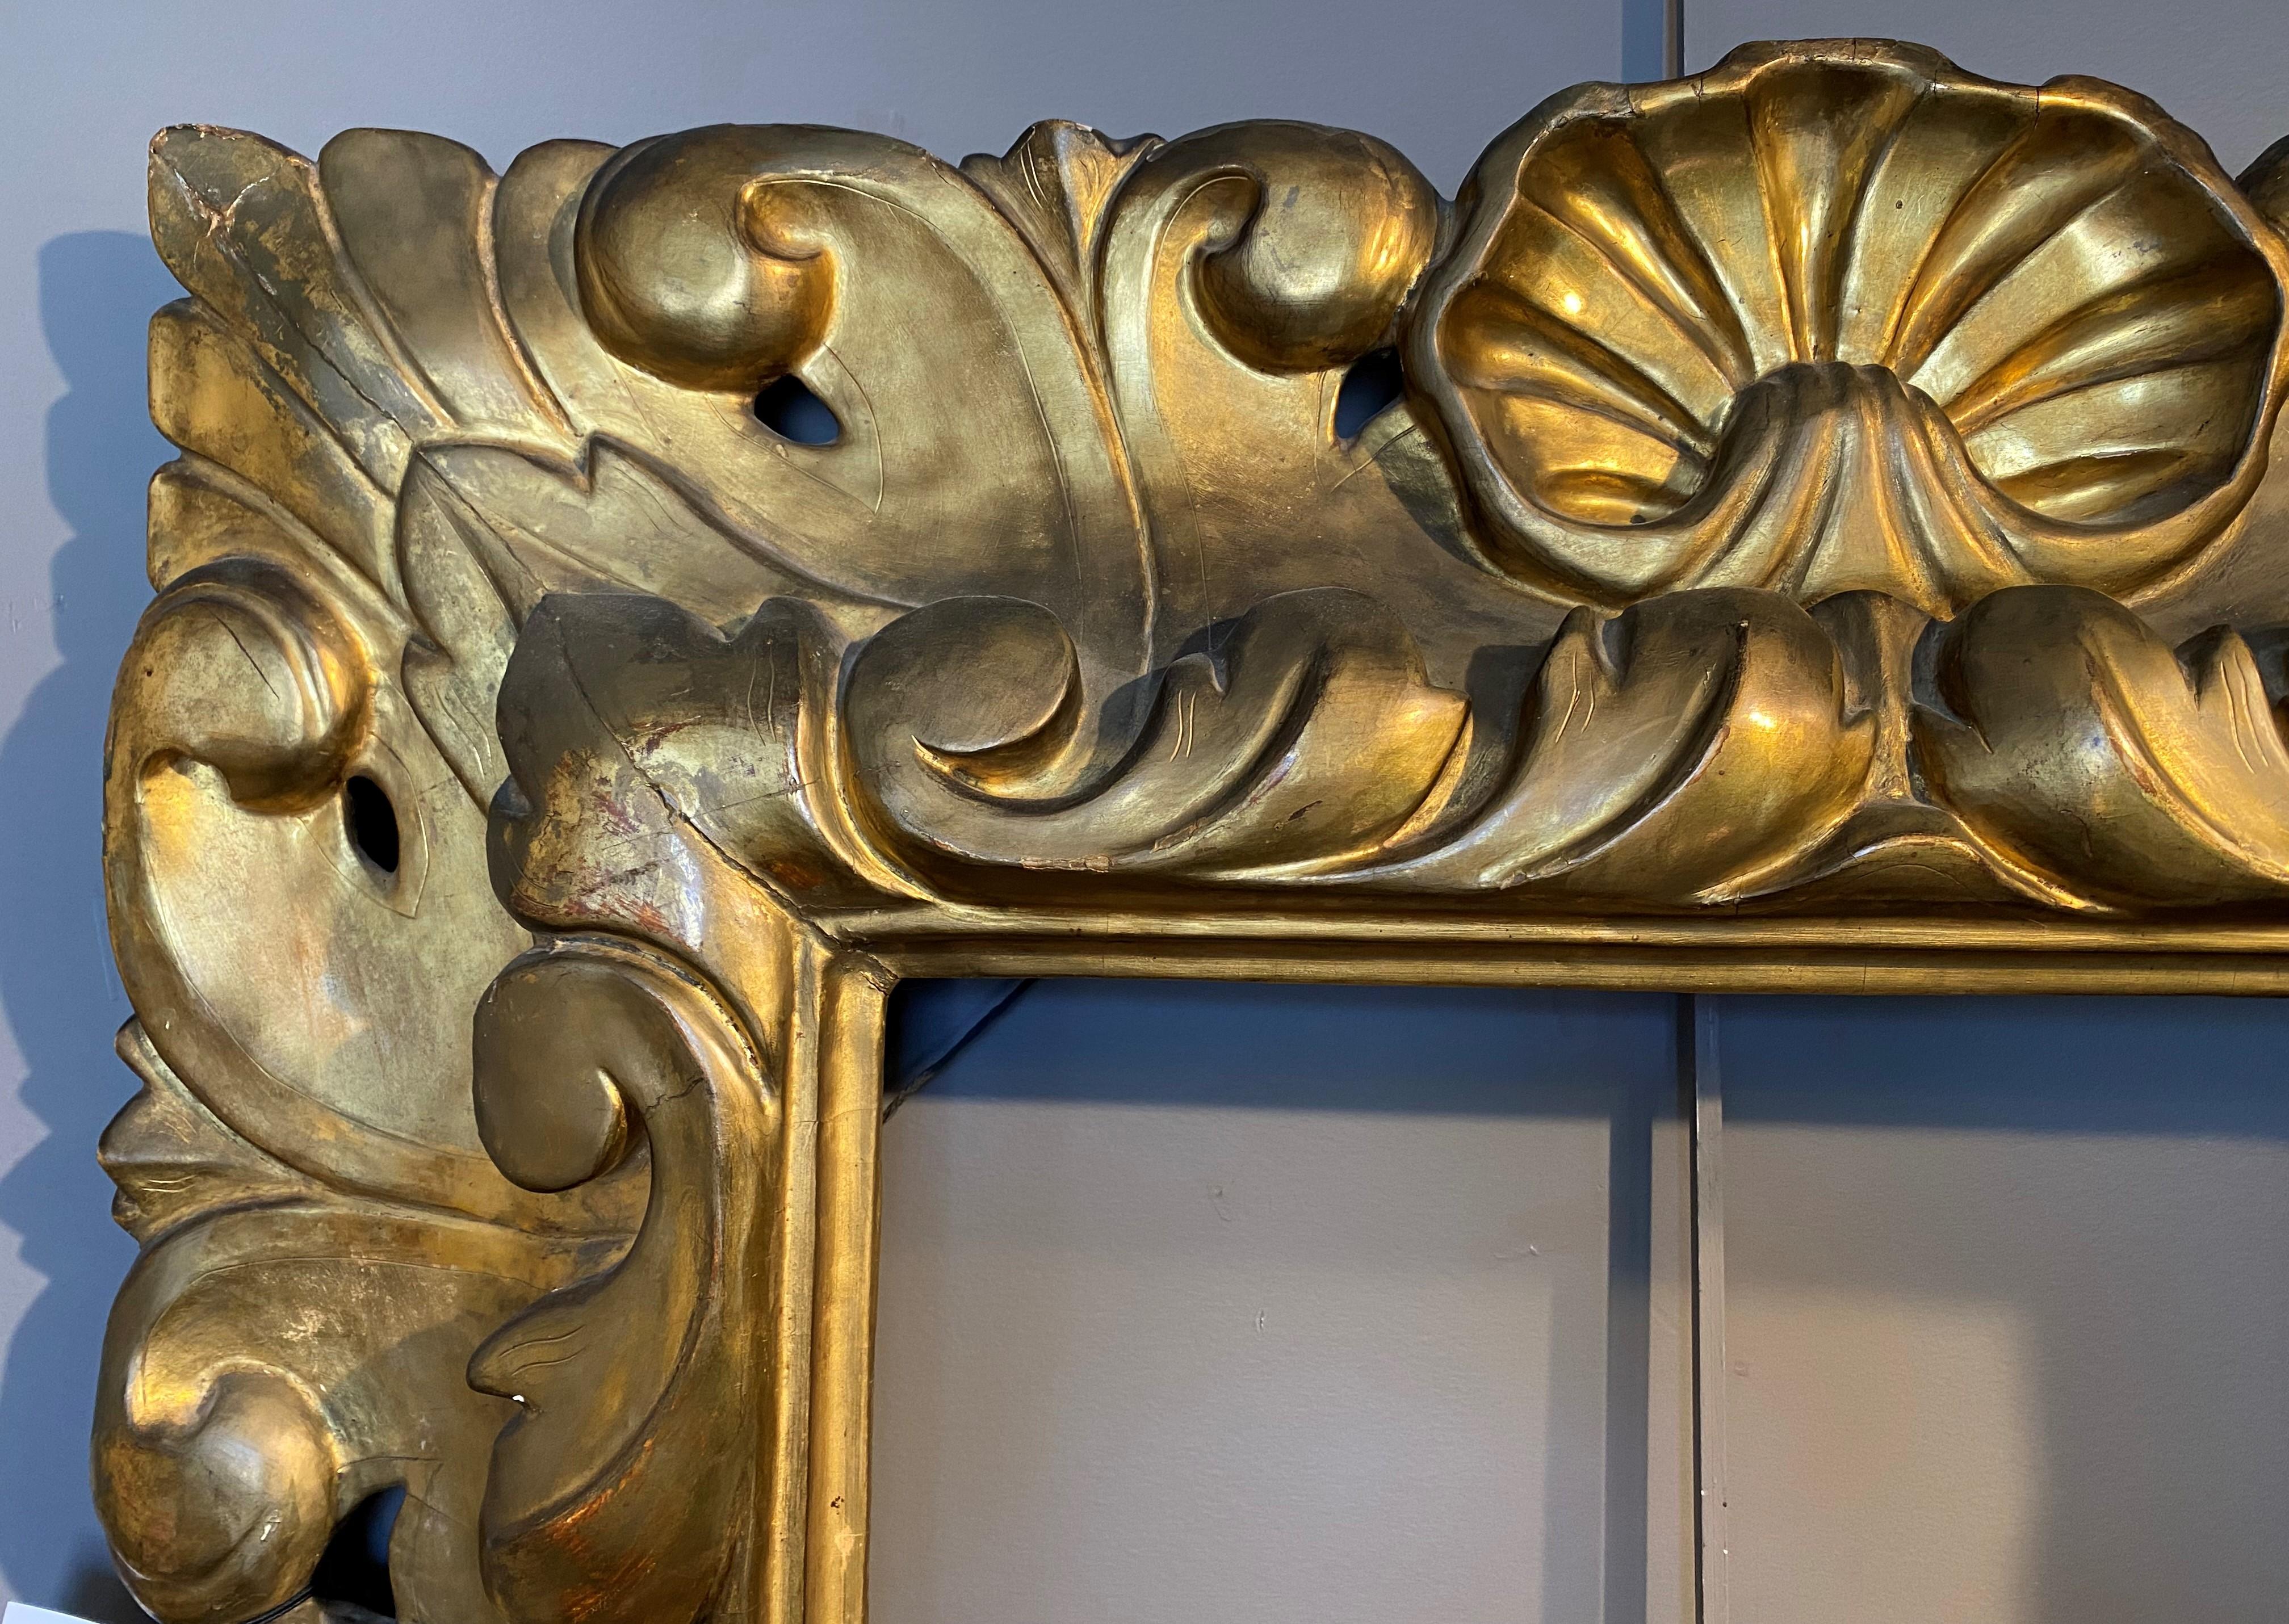 A fine Rococo style pierce carved giltwood frame with shell decoration, probably Italian in origin, dating to the 17th/18th century, in very good condition, with minor gilt rubs, imperfections, and light wear commensurate with age and use.